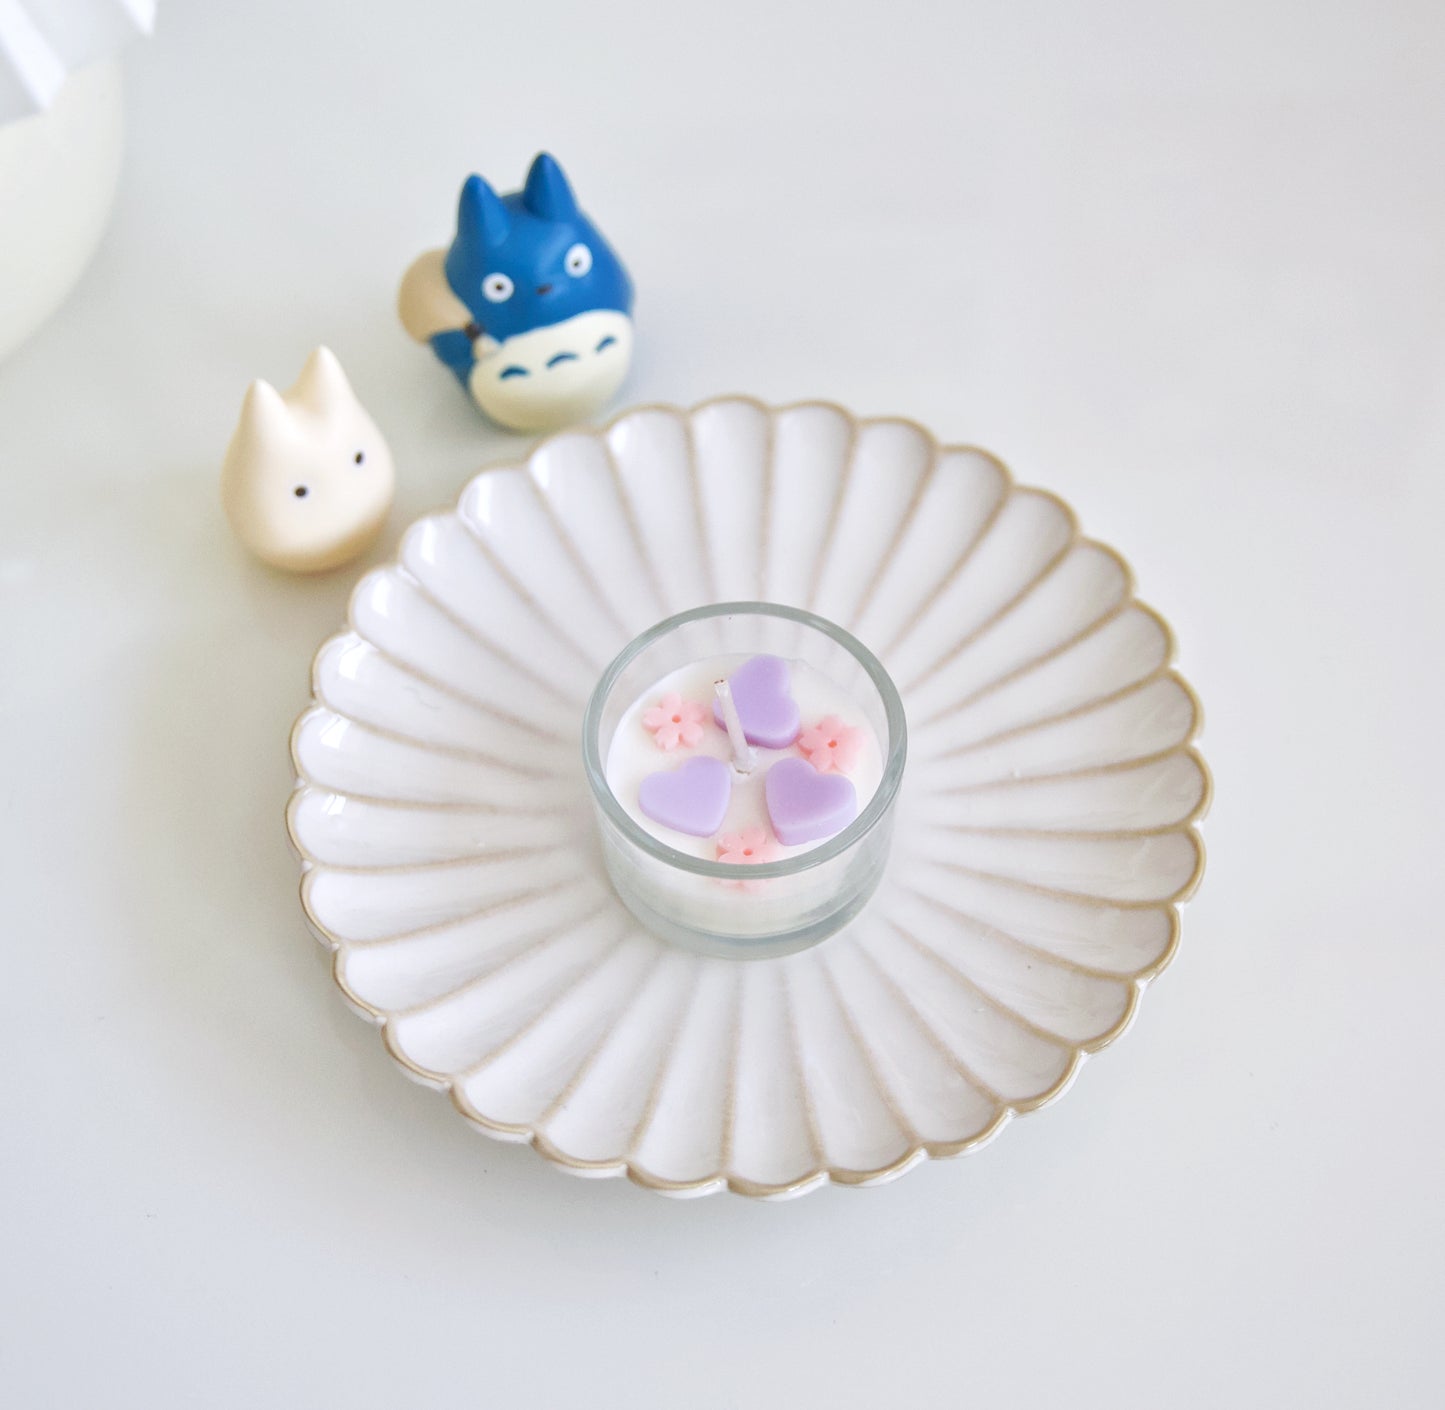 Handmade Tealight Pastel Flower Candle - Unscented Decorative Candle - Vegan Soywax